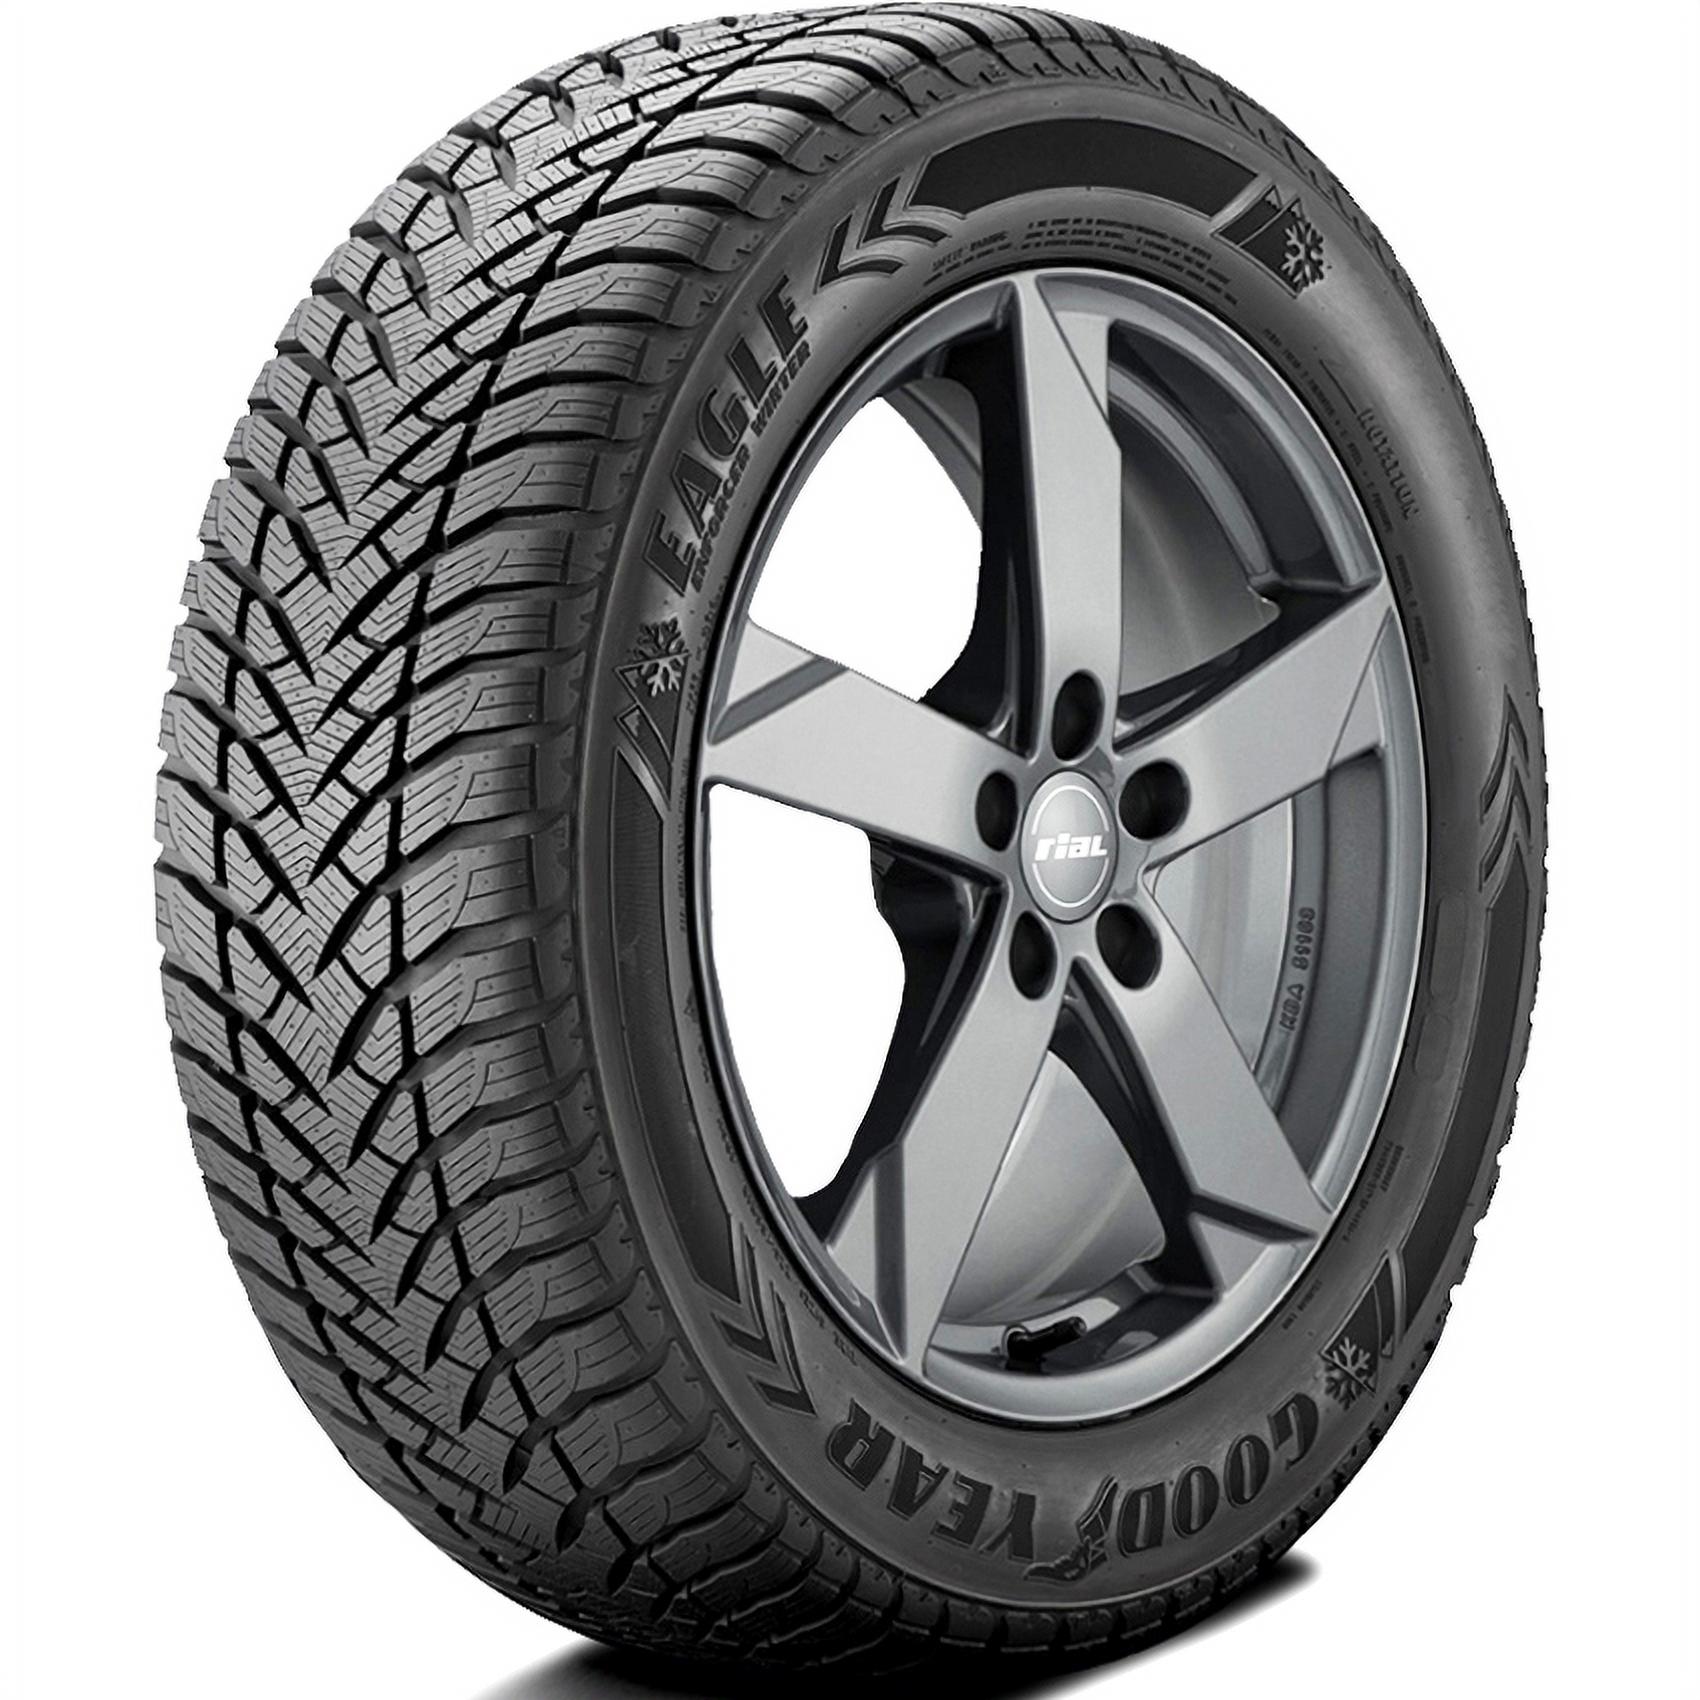 Goodyear Eagle Enforcer Winter Tire reviews and ratings